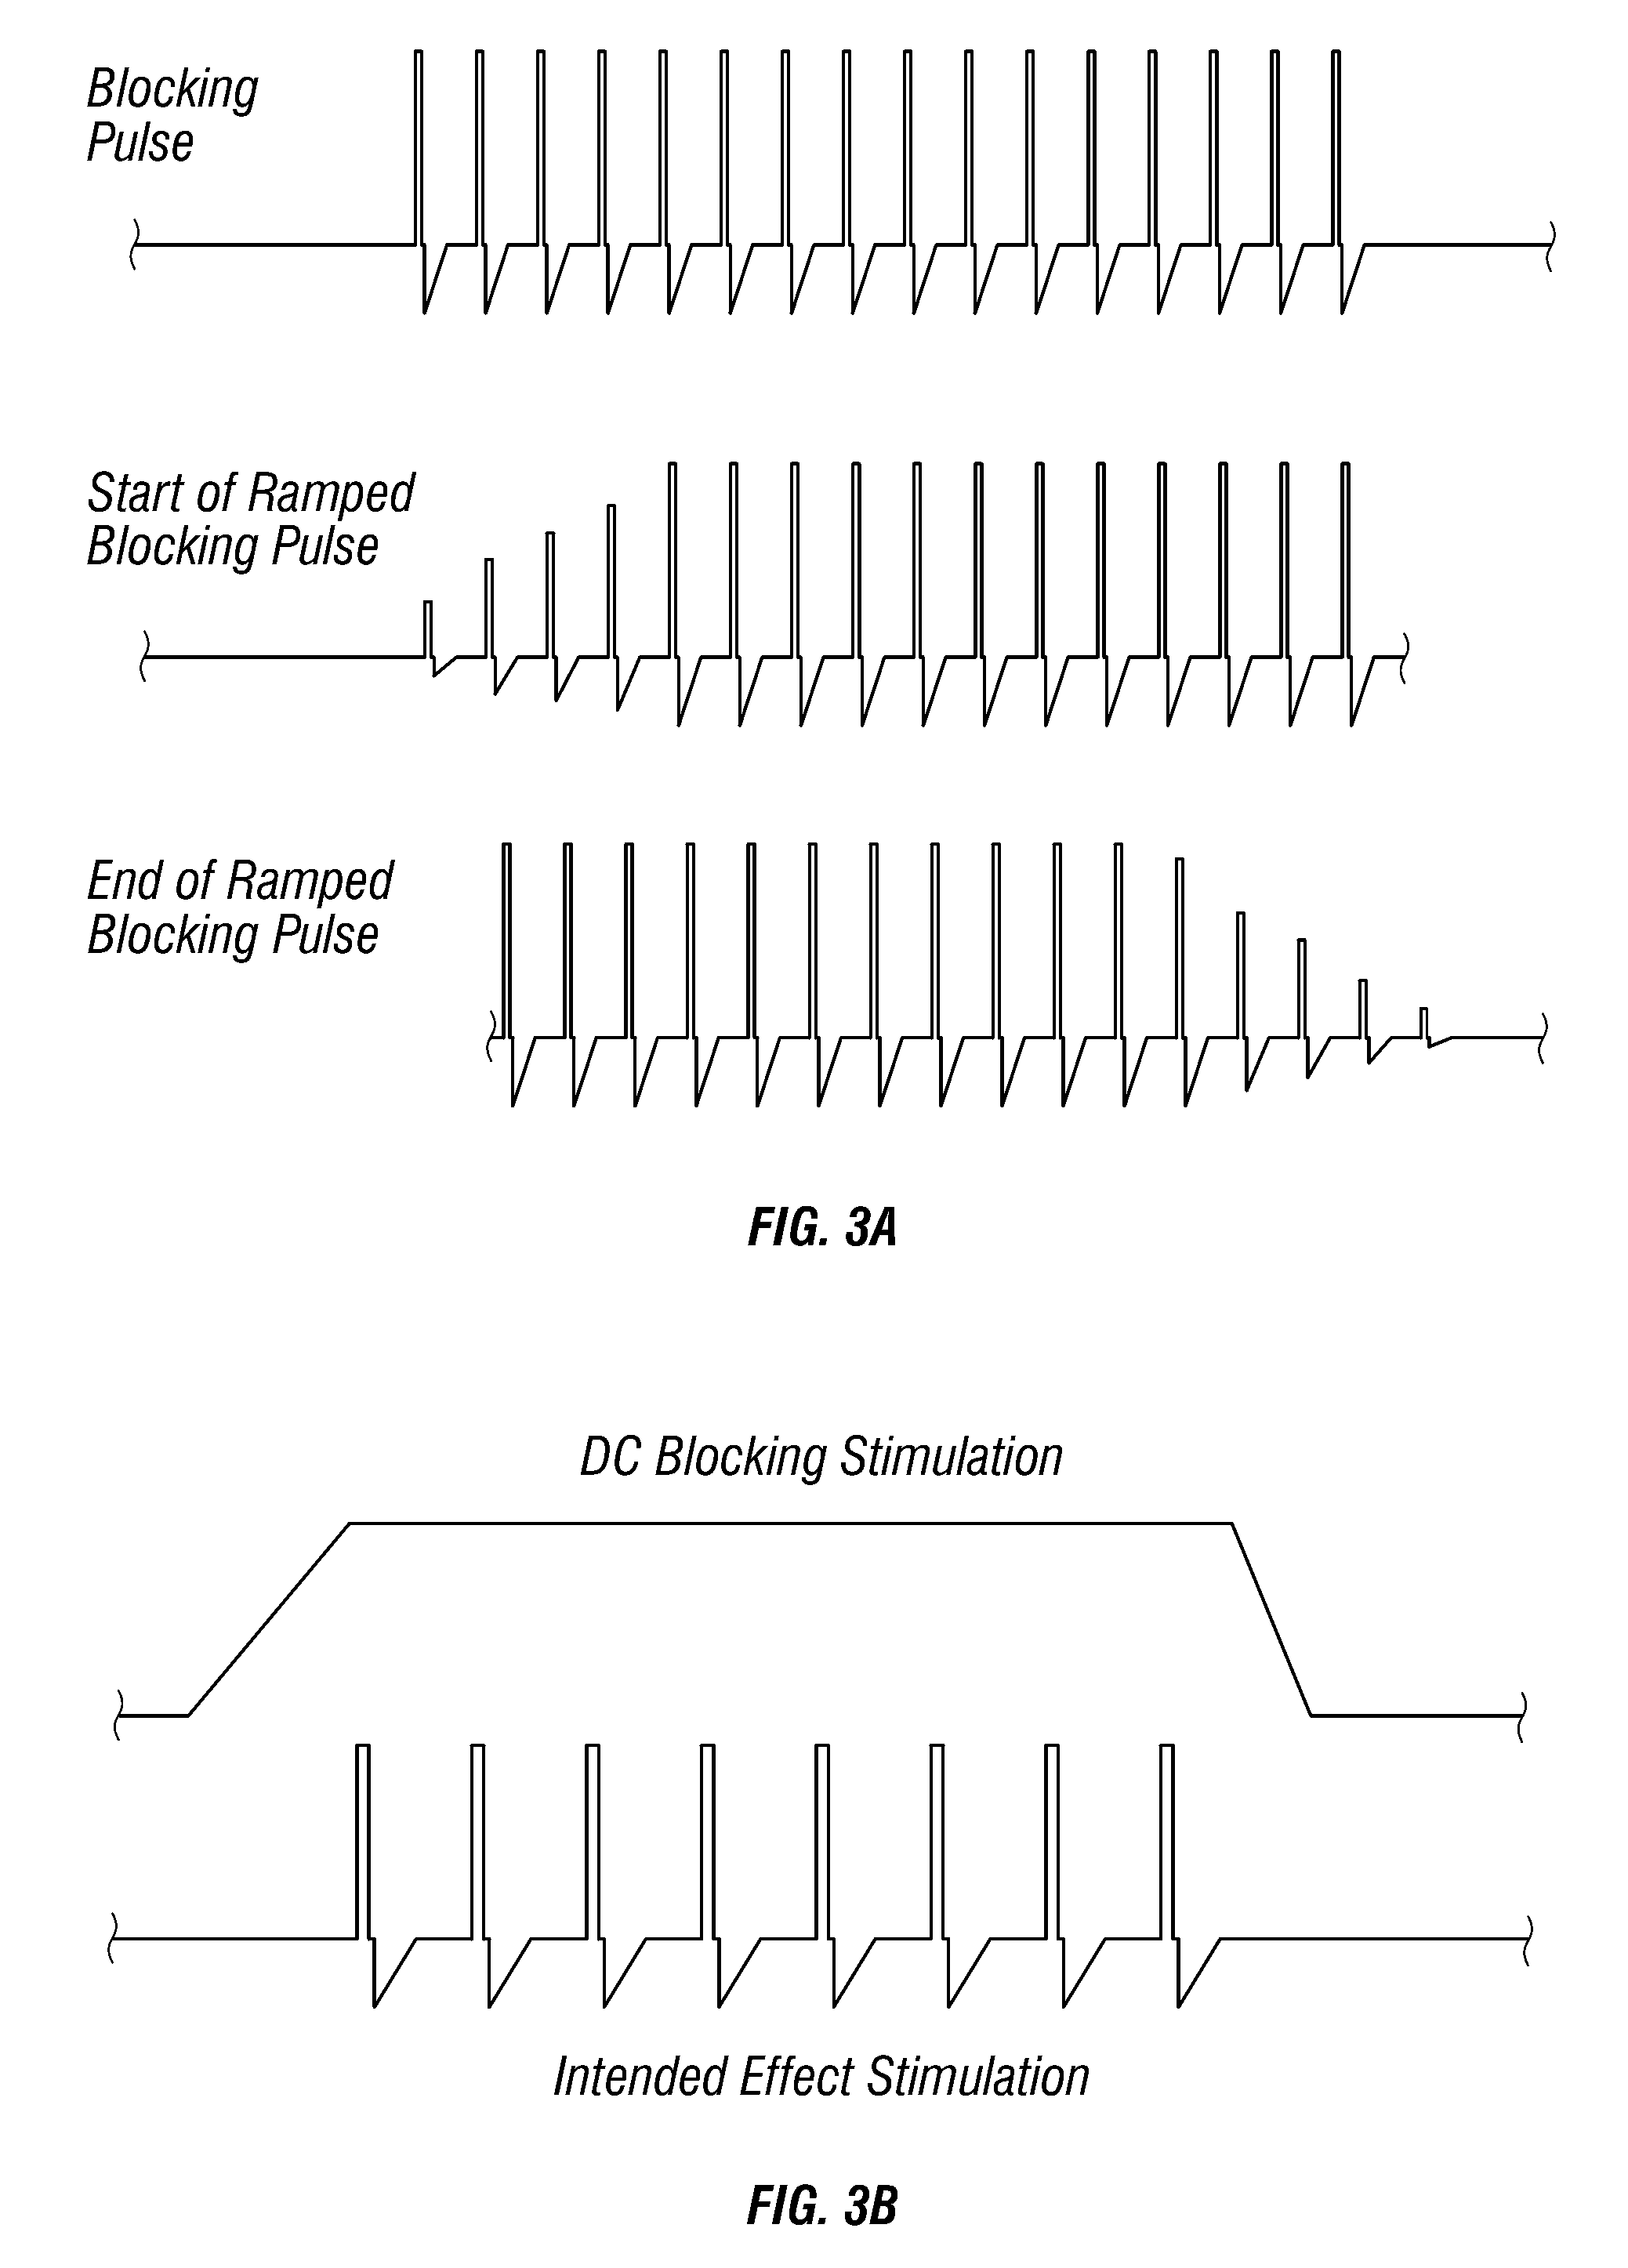 Method For Blocking Activation Of Tissue Or Conduction Of Action Potentials While Other Tissue Is Being Therapeutically Activated